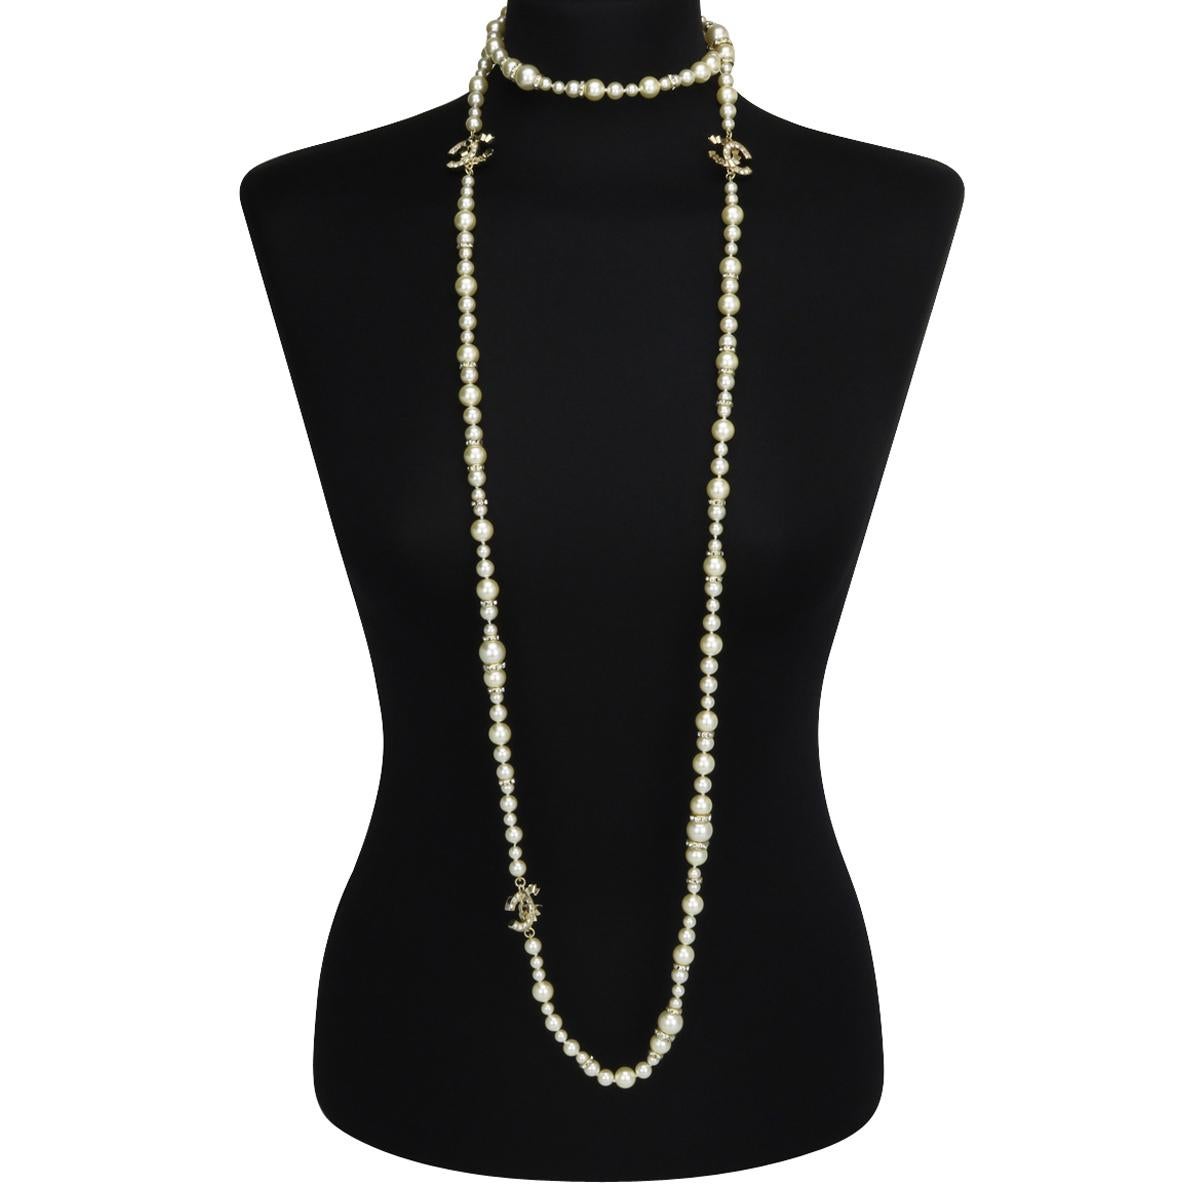 Authentic CHANEL CC Faux Pearl Crystal beads Gold Long Necklace 2021 (P21 C).

This stunning long necklace is in excellent condition.

It is made of exquisite various-sized baroque pearl beads, with large interlocking CCs pendants with crystal